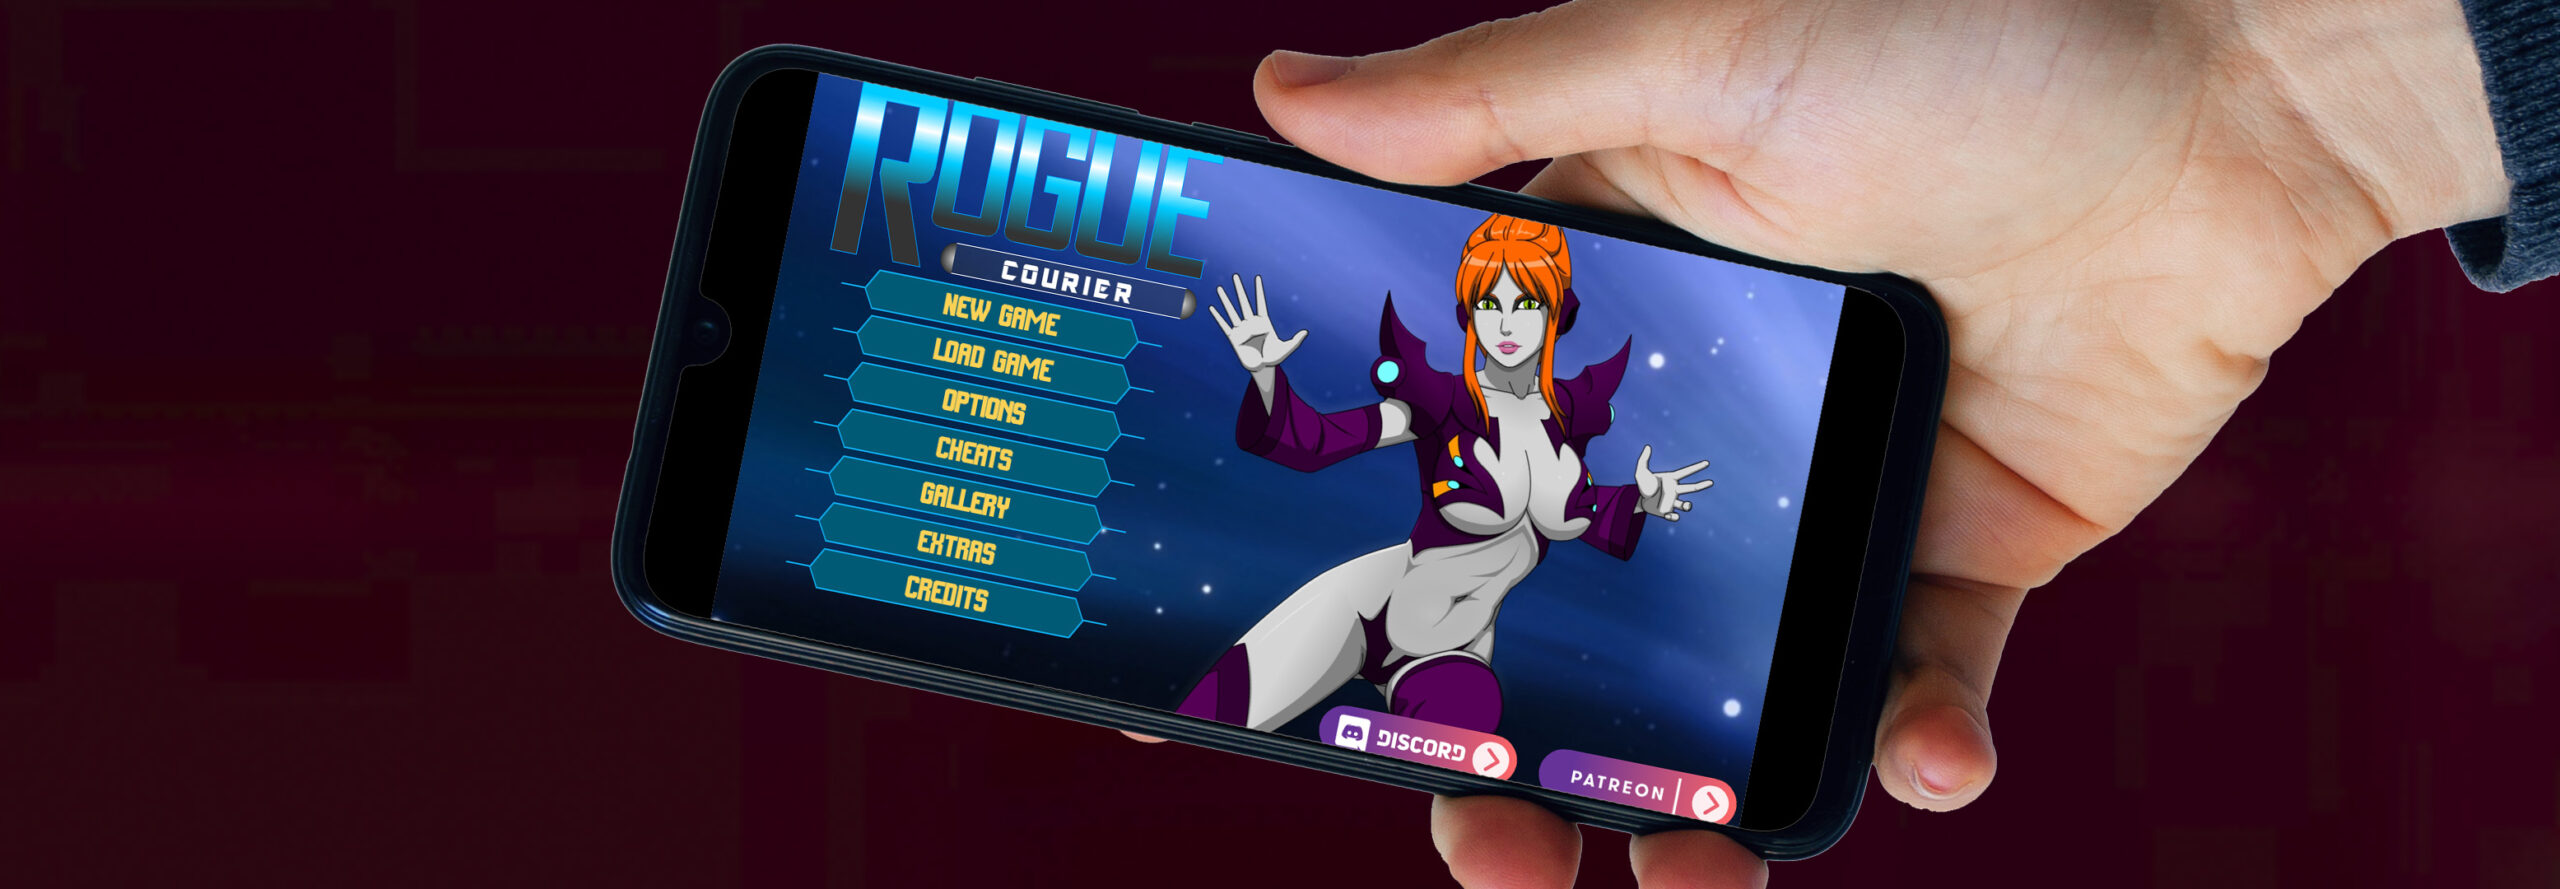 Rogue Courier Android 0.5.01.01